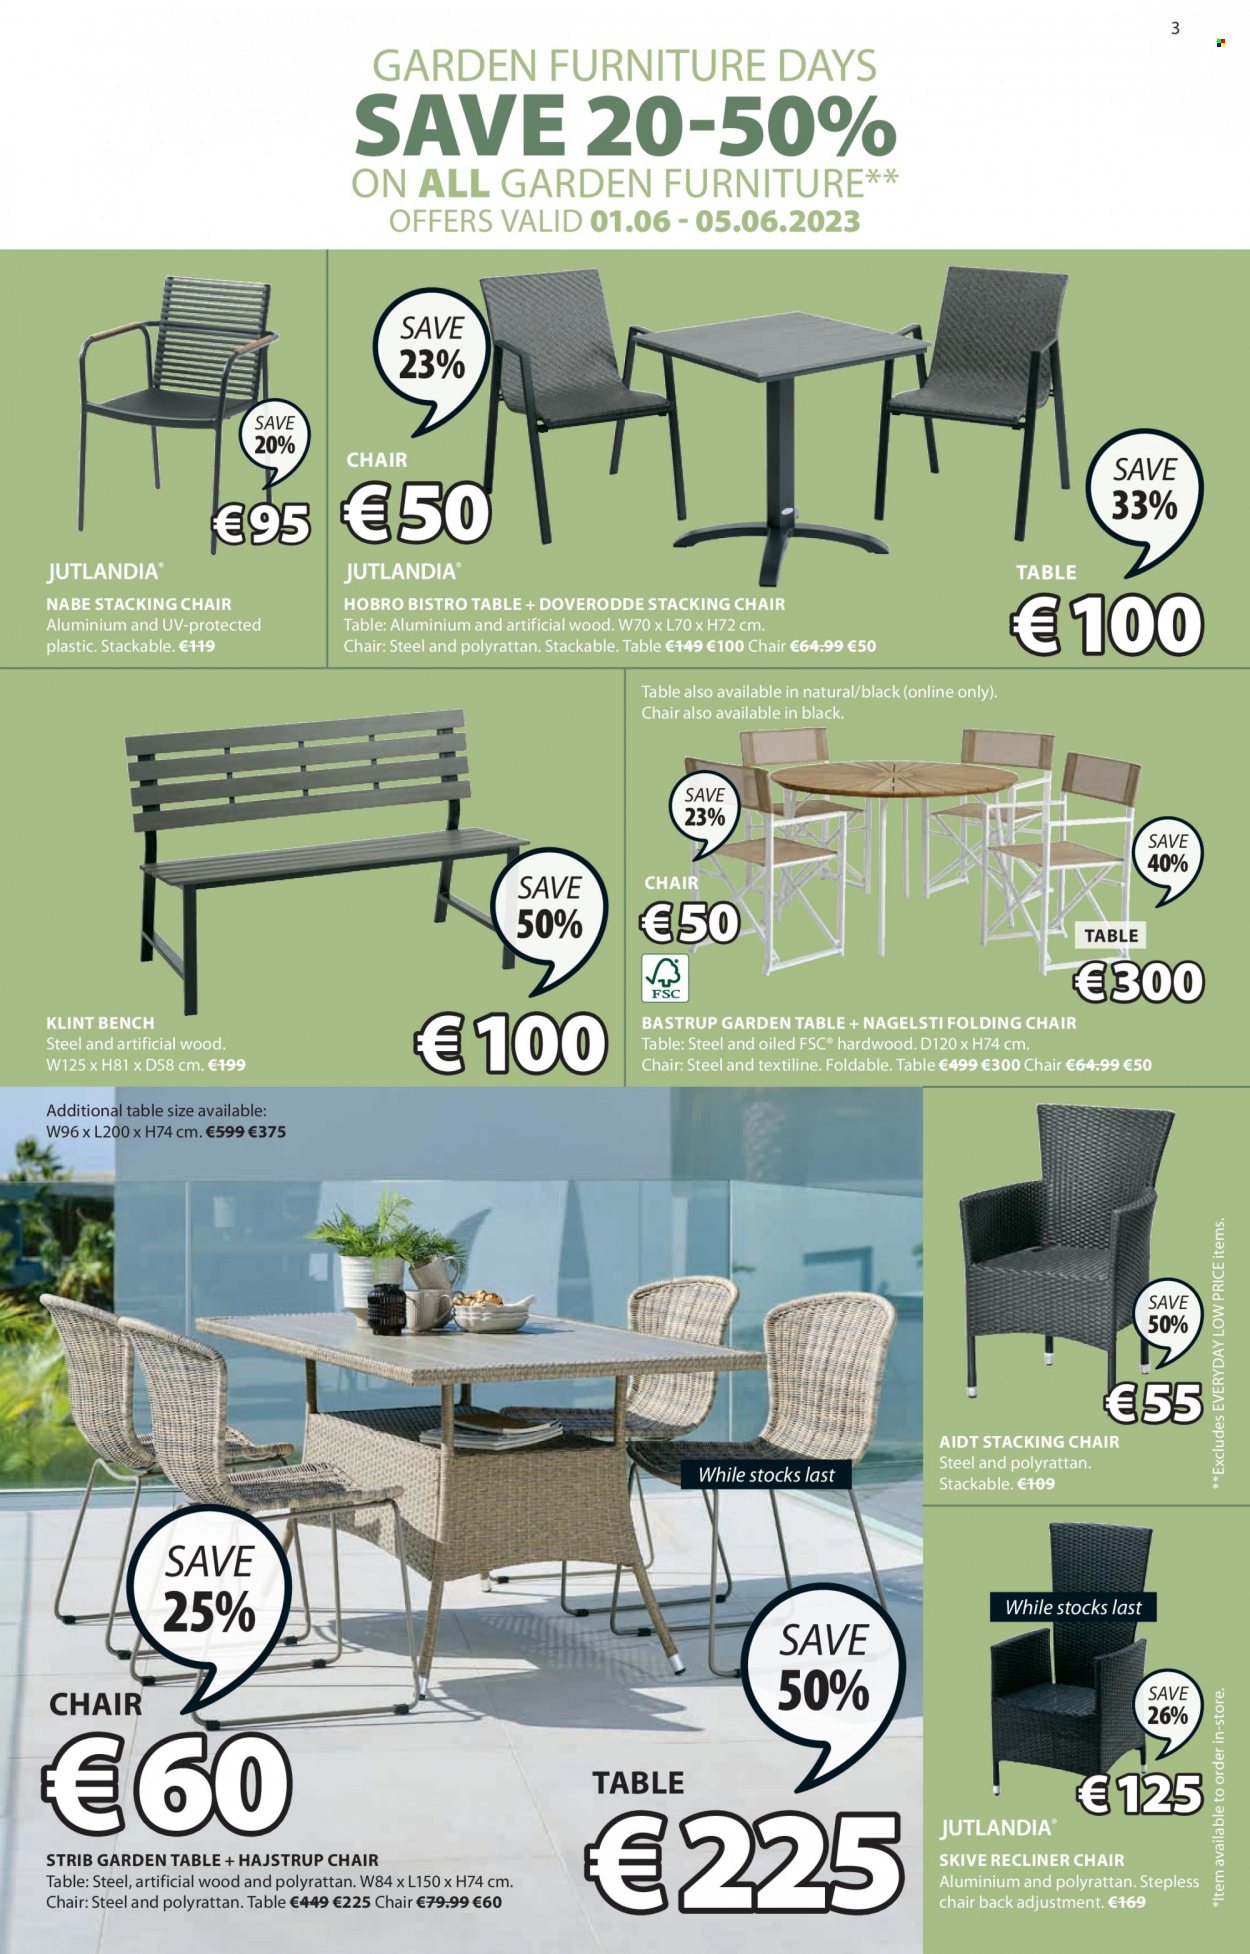 thumbnail - JYSK offer  - 01.06.2023 - 05.07.2023 - Sales products - table, chair, bench, recliner chair, coctail table, garden furniture, folding chair. Page 3.